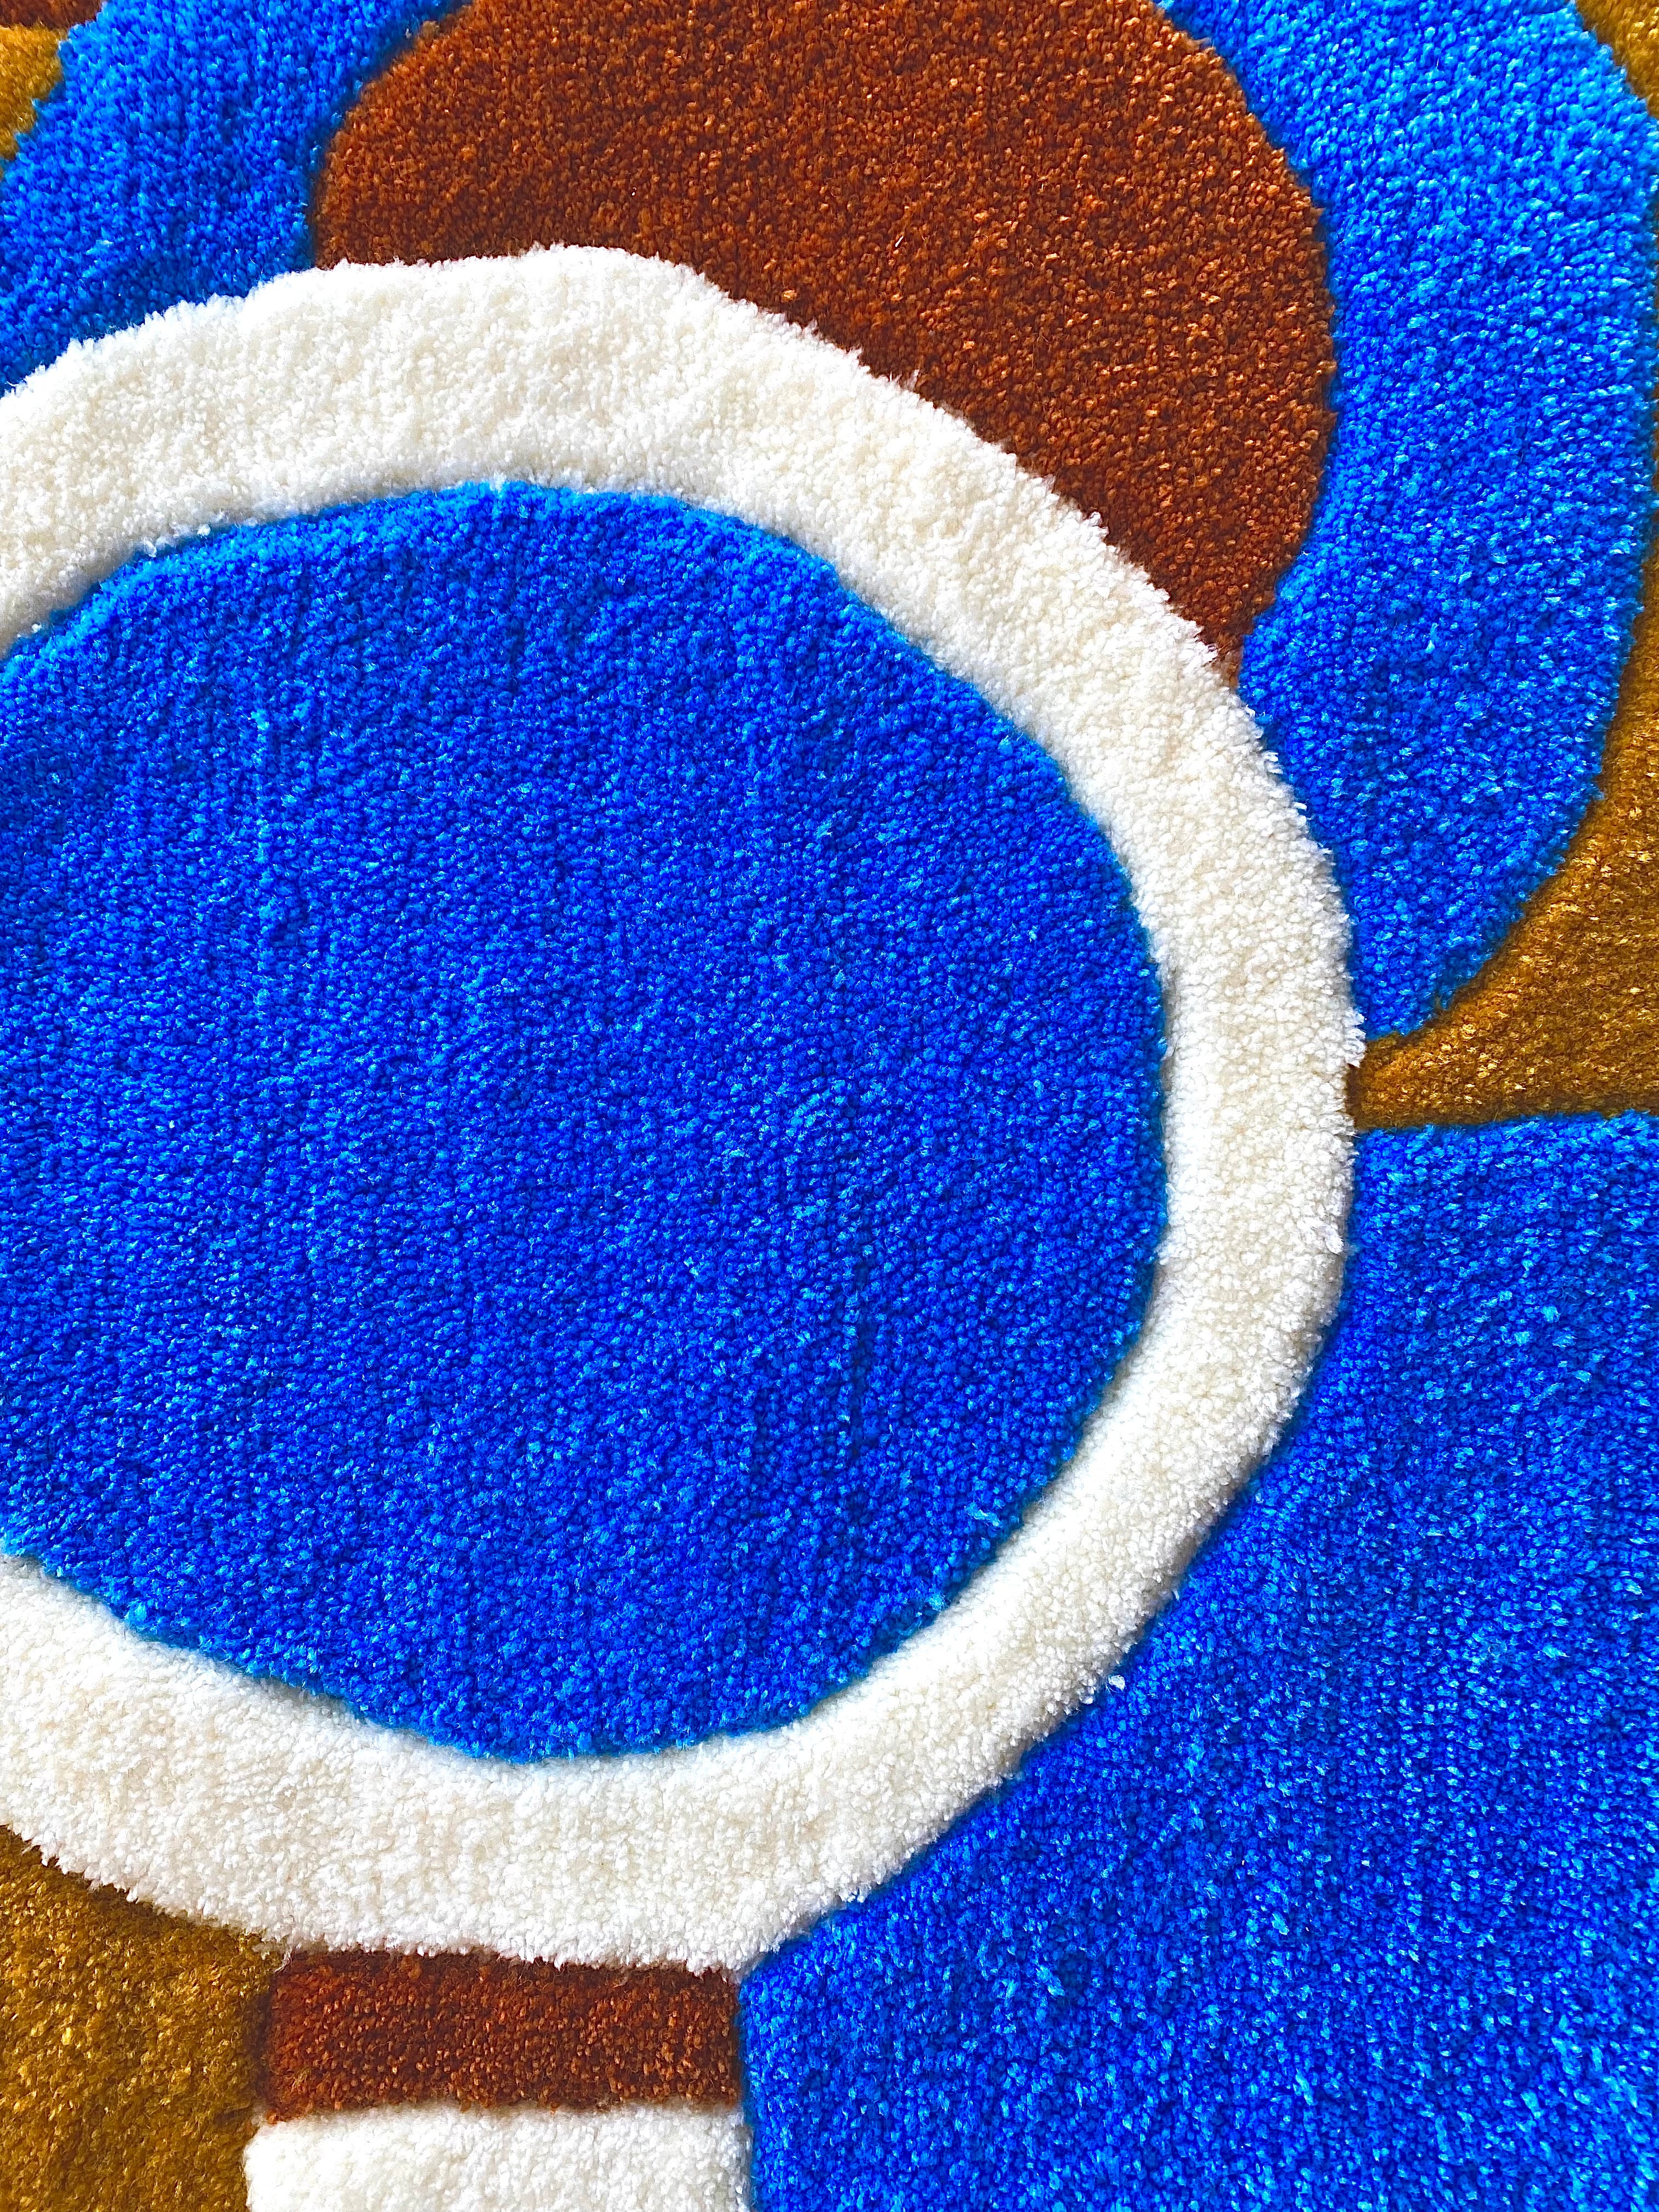 Circles and rectangles rug